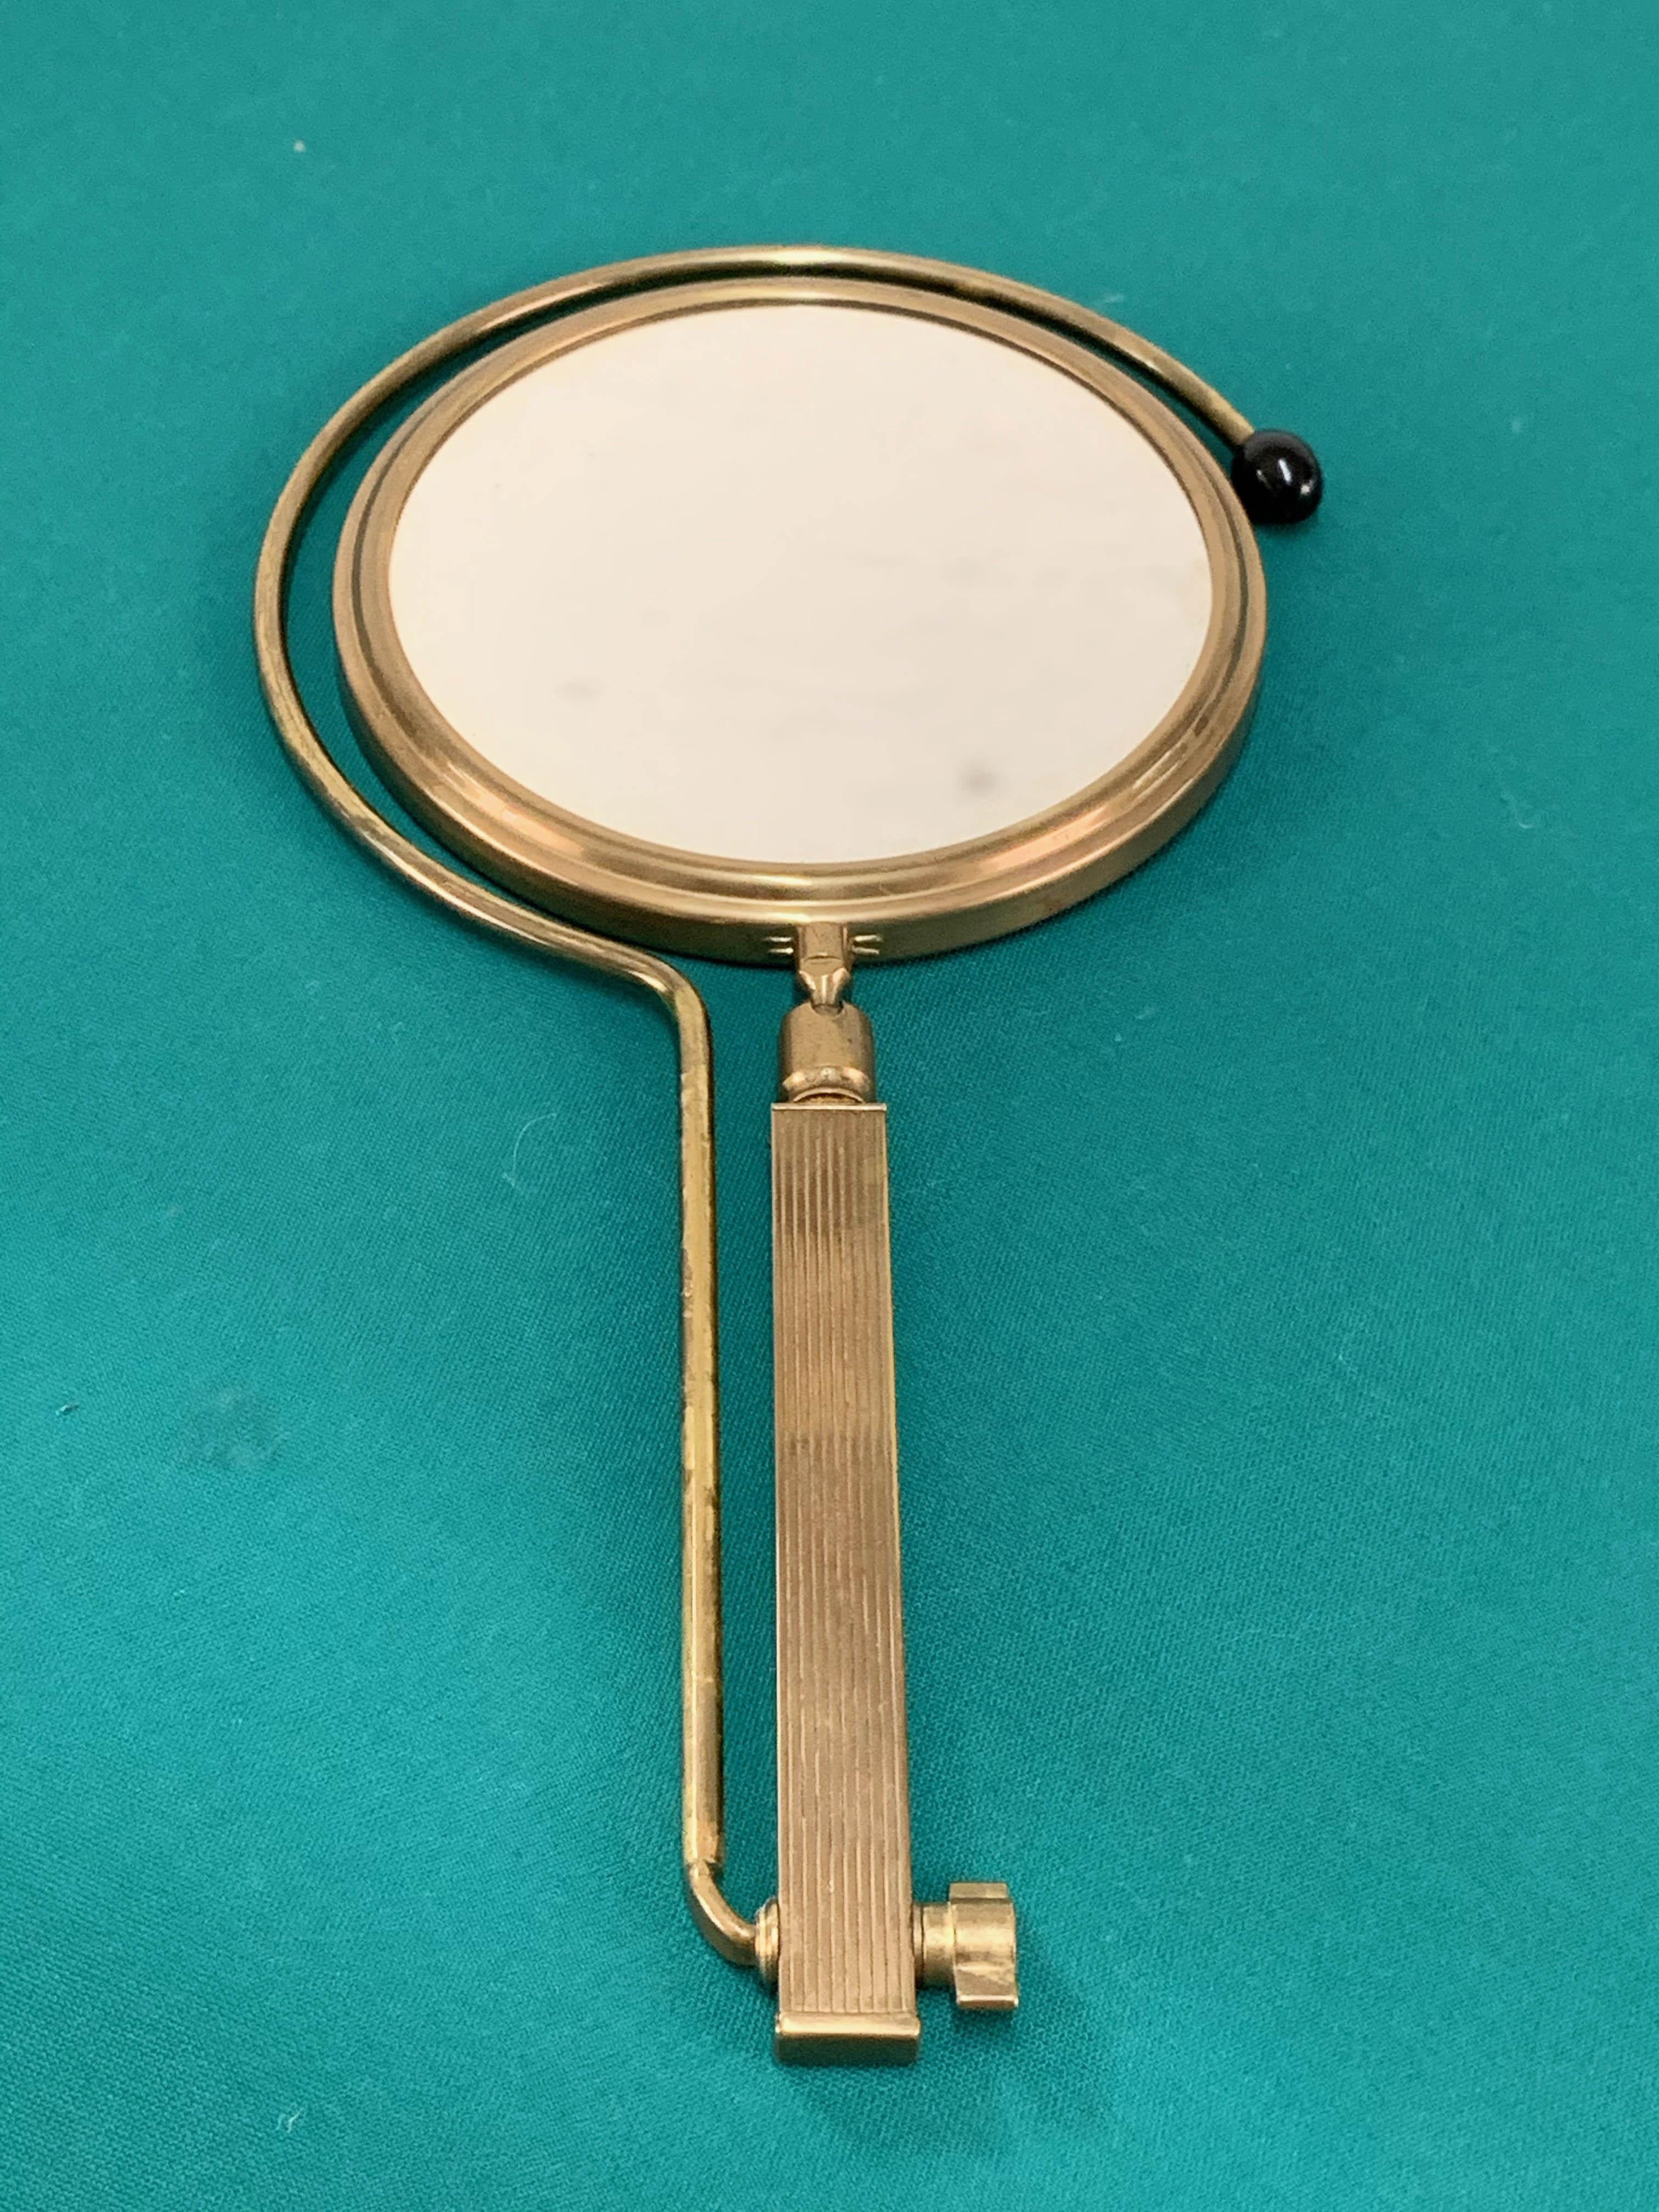 Midcentury Brass French Adjustable Table Mirror with a Two-Sides Stand, 1950s For Sale 6